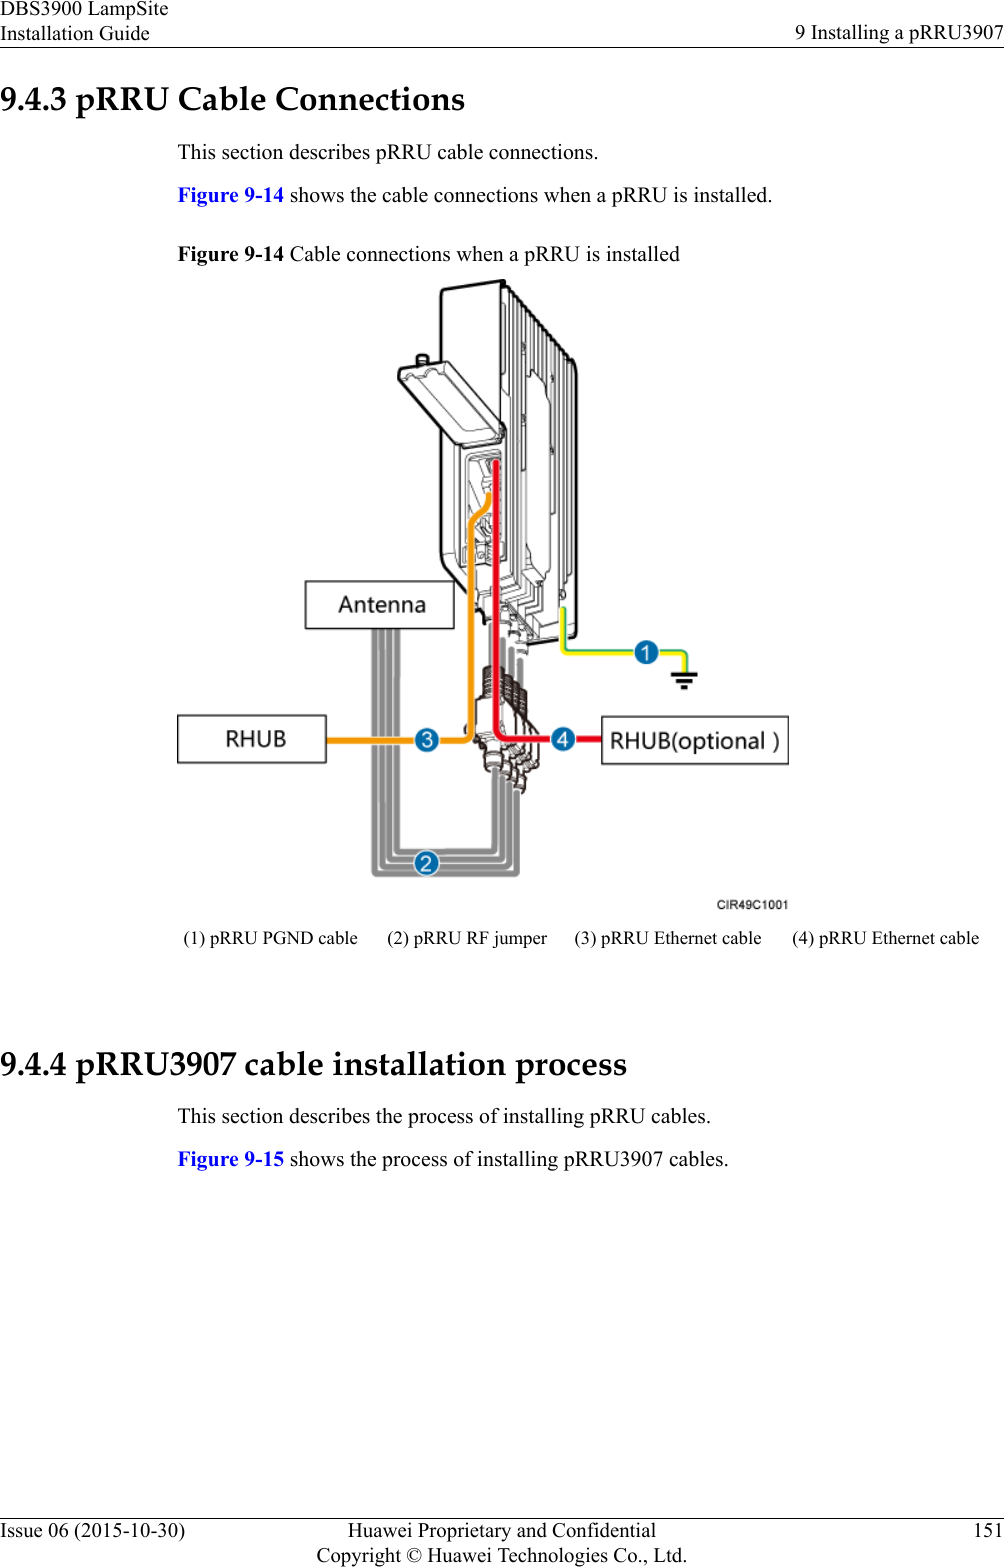 9.4.3 pRRU Cable ConnectionsThis section describes pRRU cable connections.Figure 9-14 shows the cable connections when a pRRU is installed.Figure 9-14 Cable connections when a pRRU is installed(1) pRRU PGND cable (2) pRRU RF jumper (3) pRRU Ethernet cable (4) pRRU Ethernet cable 9.4.4 pRRU3907 cable installation processThis section describes the process of installing pRRU cables.Figure 9-15 shows the process of installing pRRU3907 cables.DBS3900 LampSiteInstallation Guide 9 Installing a pRRU3907Issue 06 (2015-10-30) Huawei Proprietary and ConfidentialCopyright © Huawei Technologies Co., Ltd.151